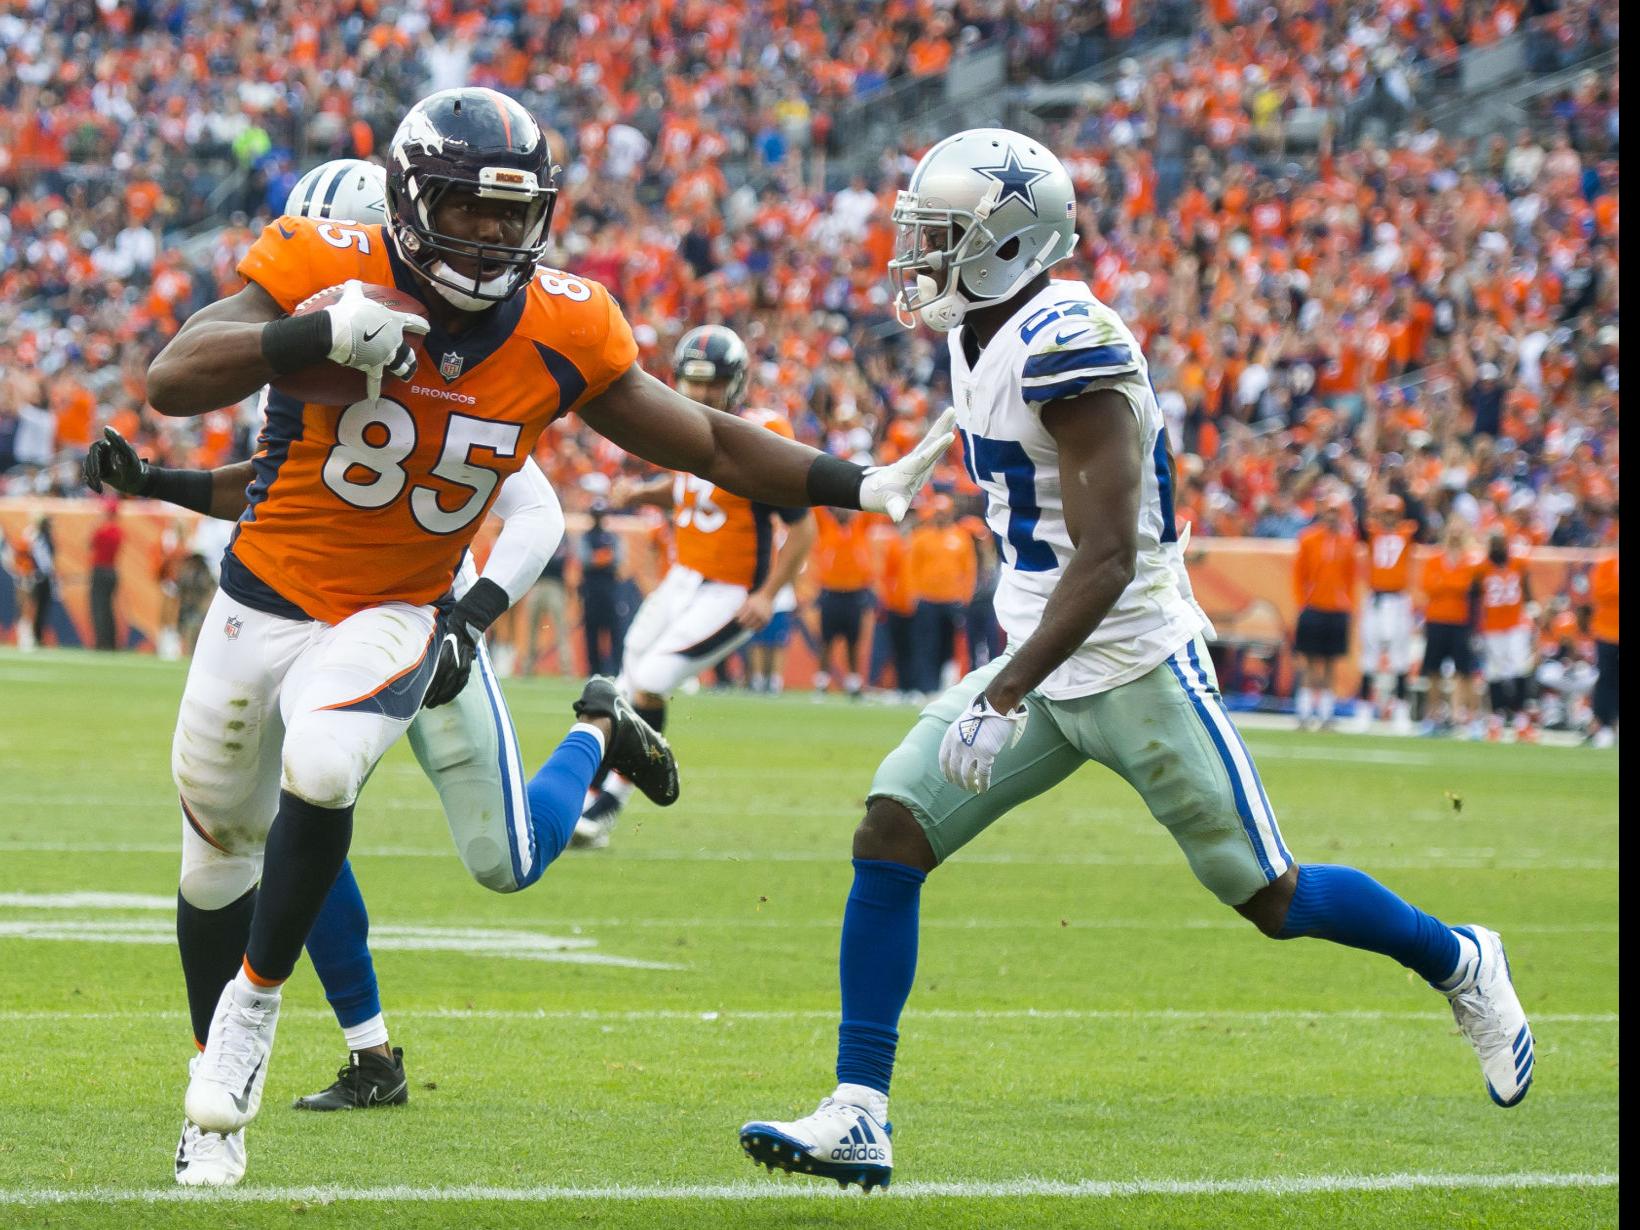 Paul Klee: Sorry, America, for a Broncos team that should be